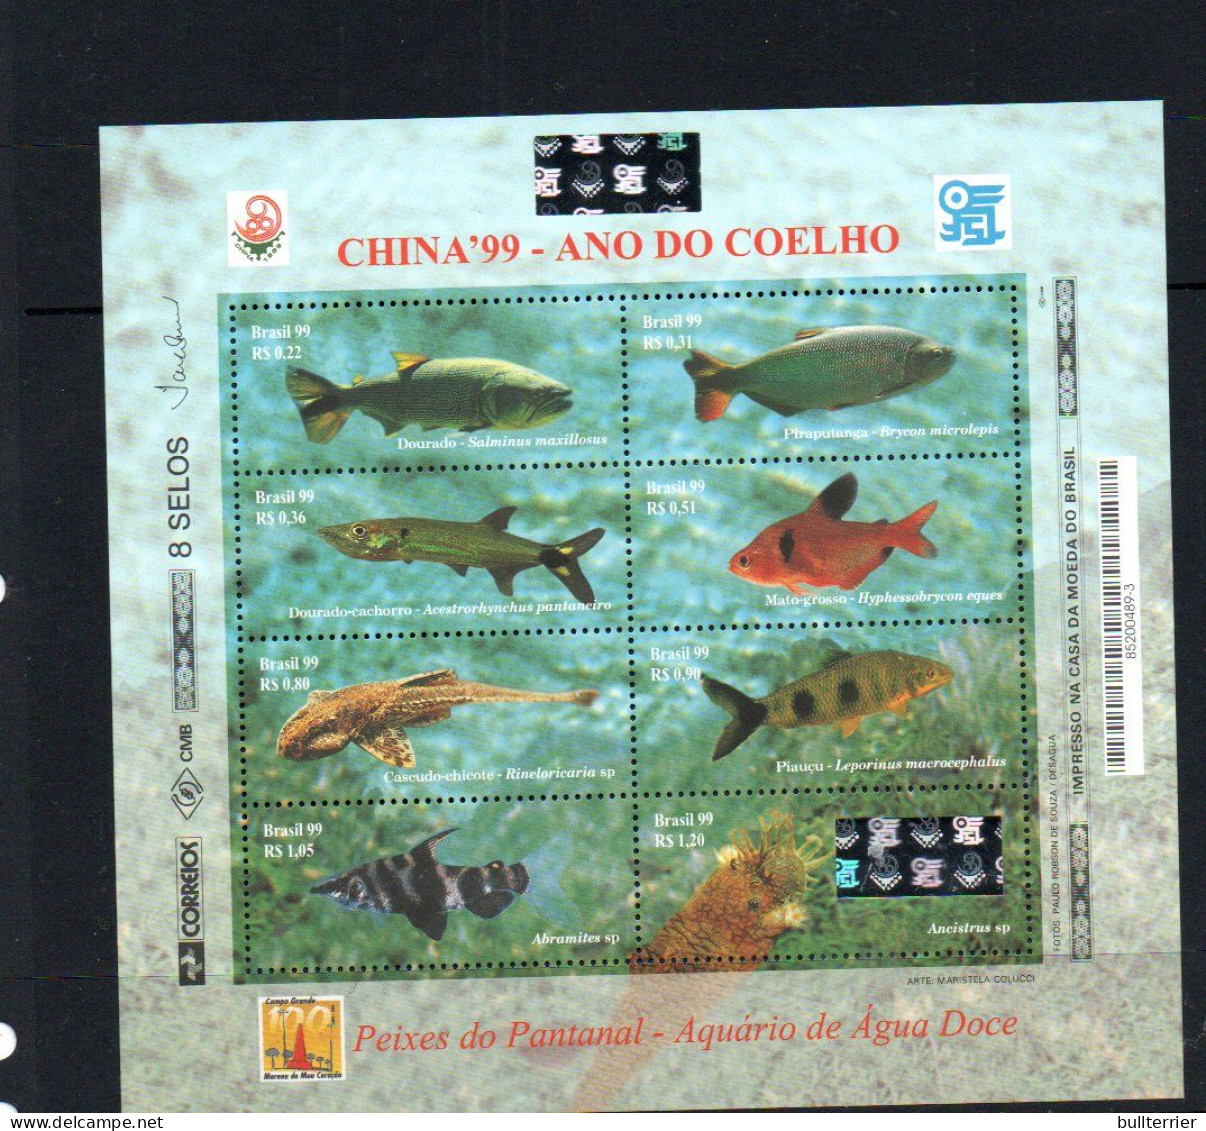 HOLOGRAMS - BRAZIL - 1999- CHINA EXPO FISHES SHEETLET OF 8 MINT NEVER HINGED - Holograms